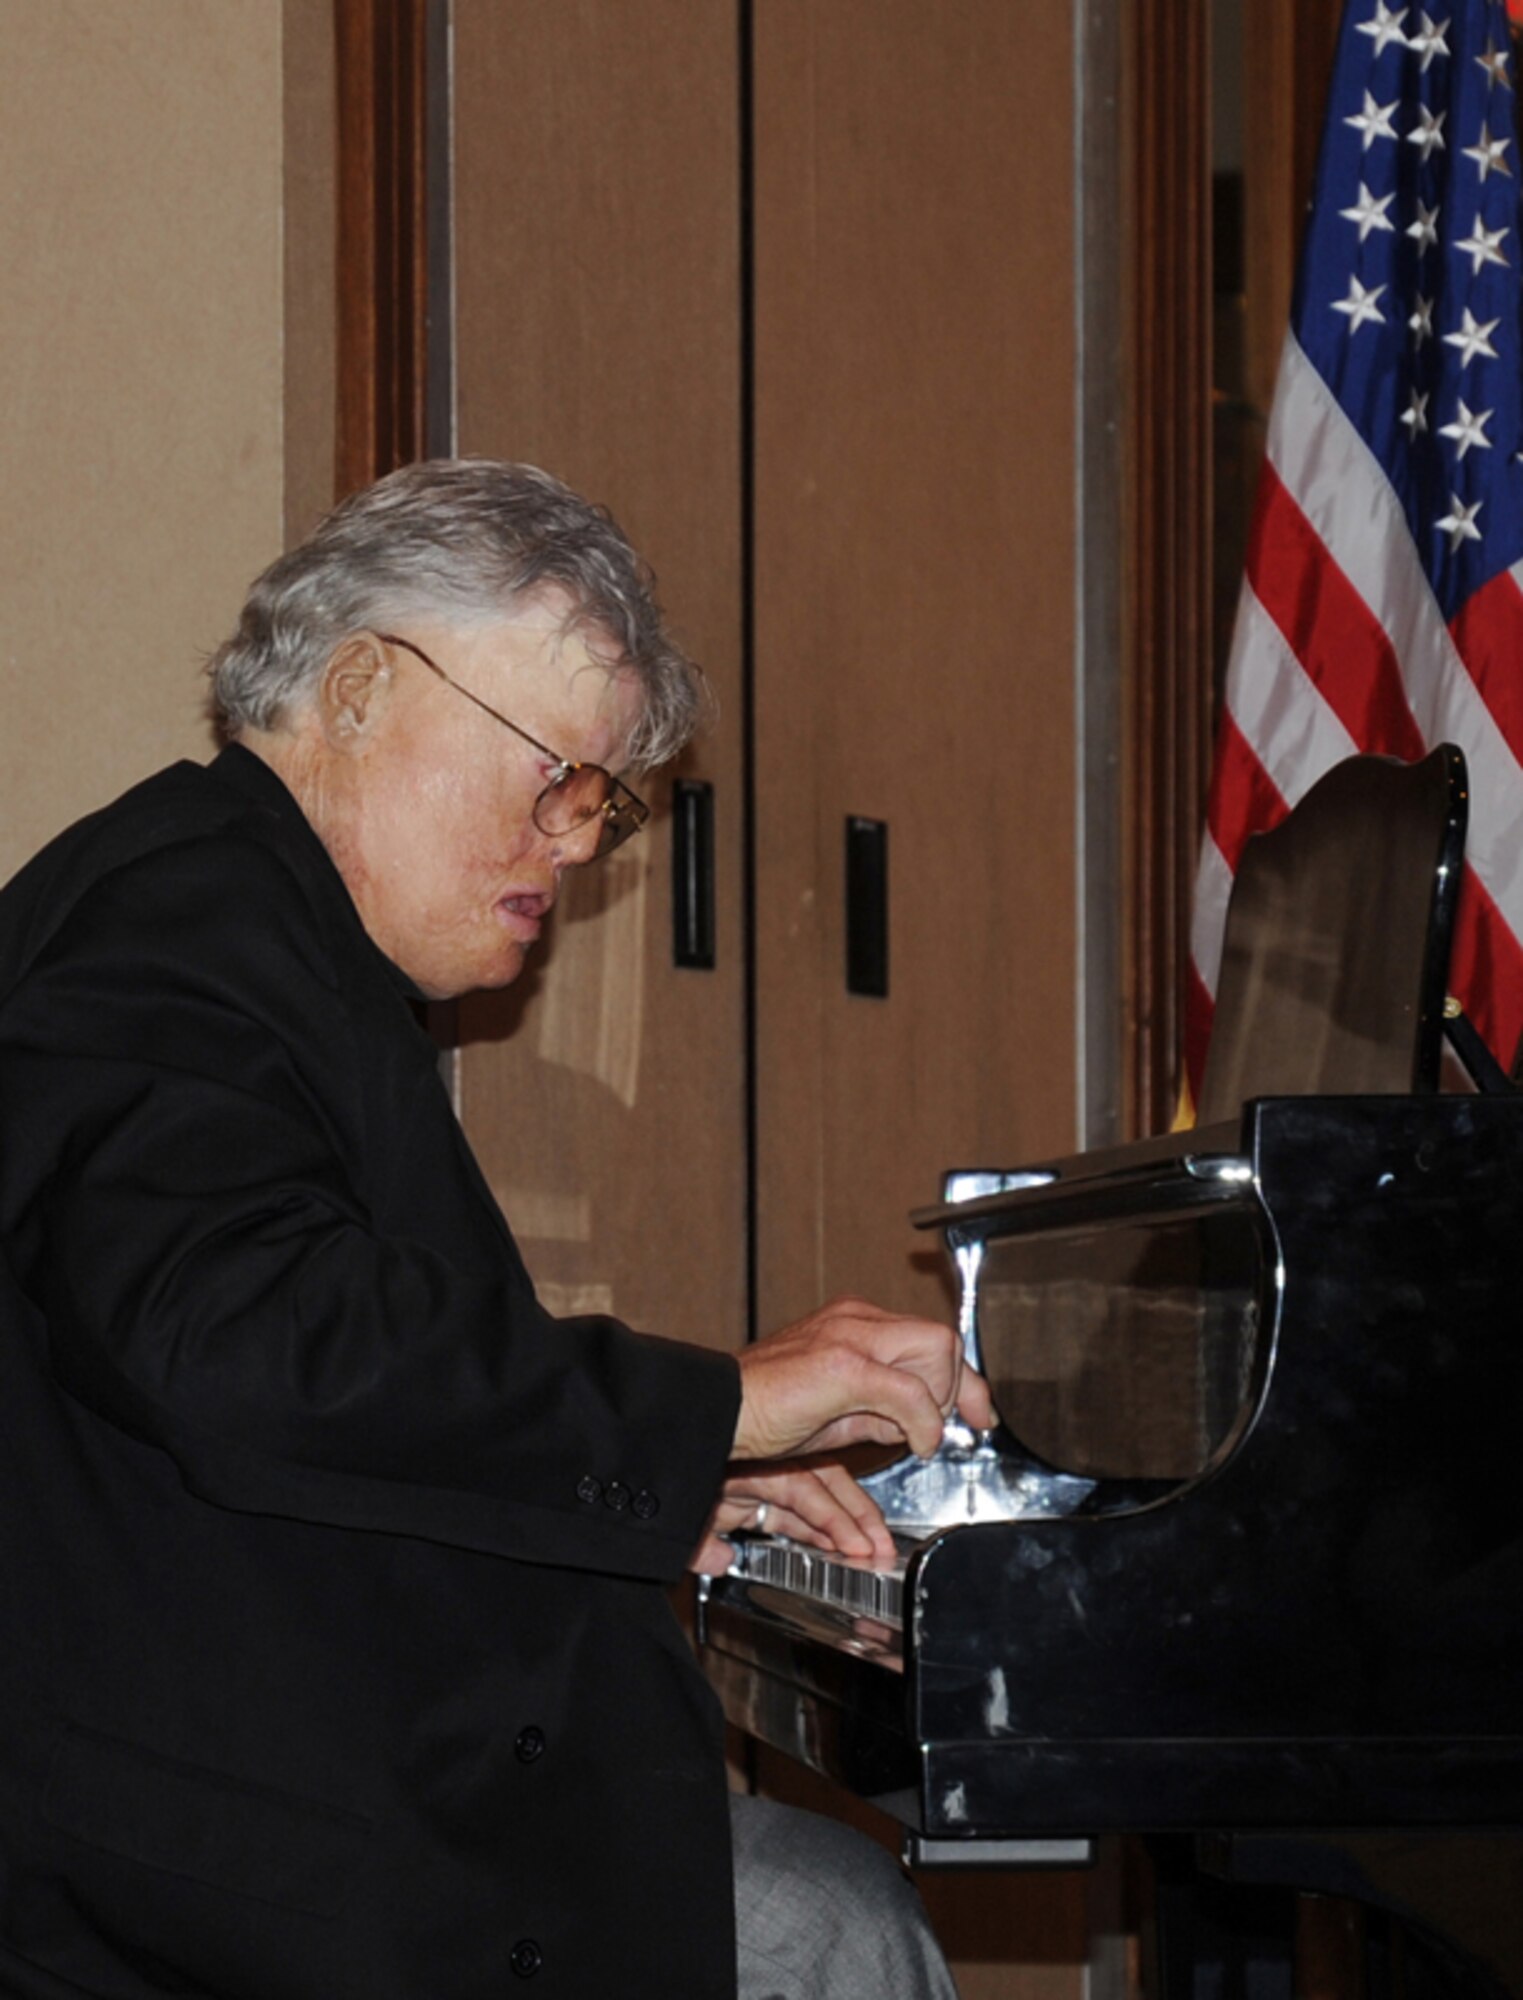 Mr. Dave Roever, a wounded Vietnam War veteran, plays “How Great Thou Art” on the piano at the Yellow Ribbon Program at the Hilton Memphis Hotel, Memphis, Tenn., Nov. 20, 2010. Mr. Roever, the guest speaker at the event, has donated much of his own time and money to support wounded warriors for several years. (U.S. Air Force photo by Senior Airman Anna-Marie Wyant) 